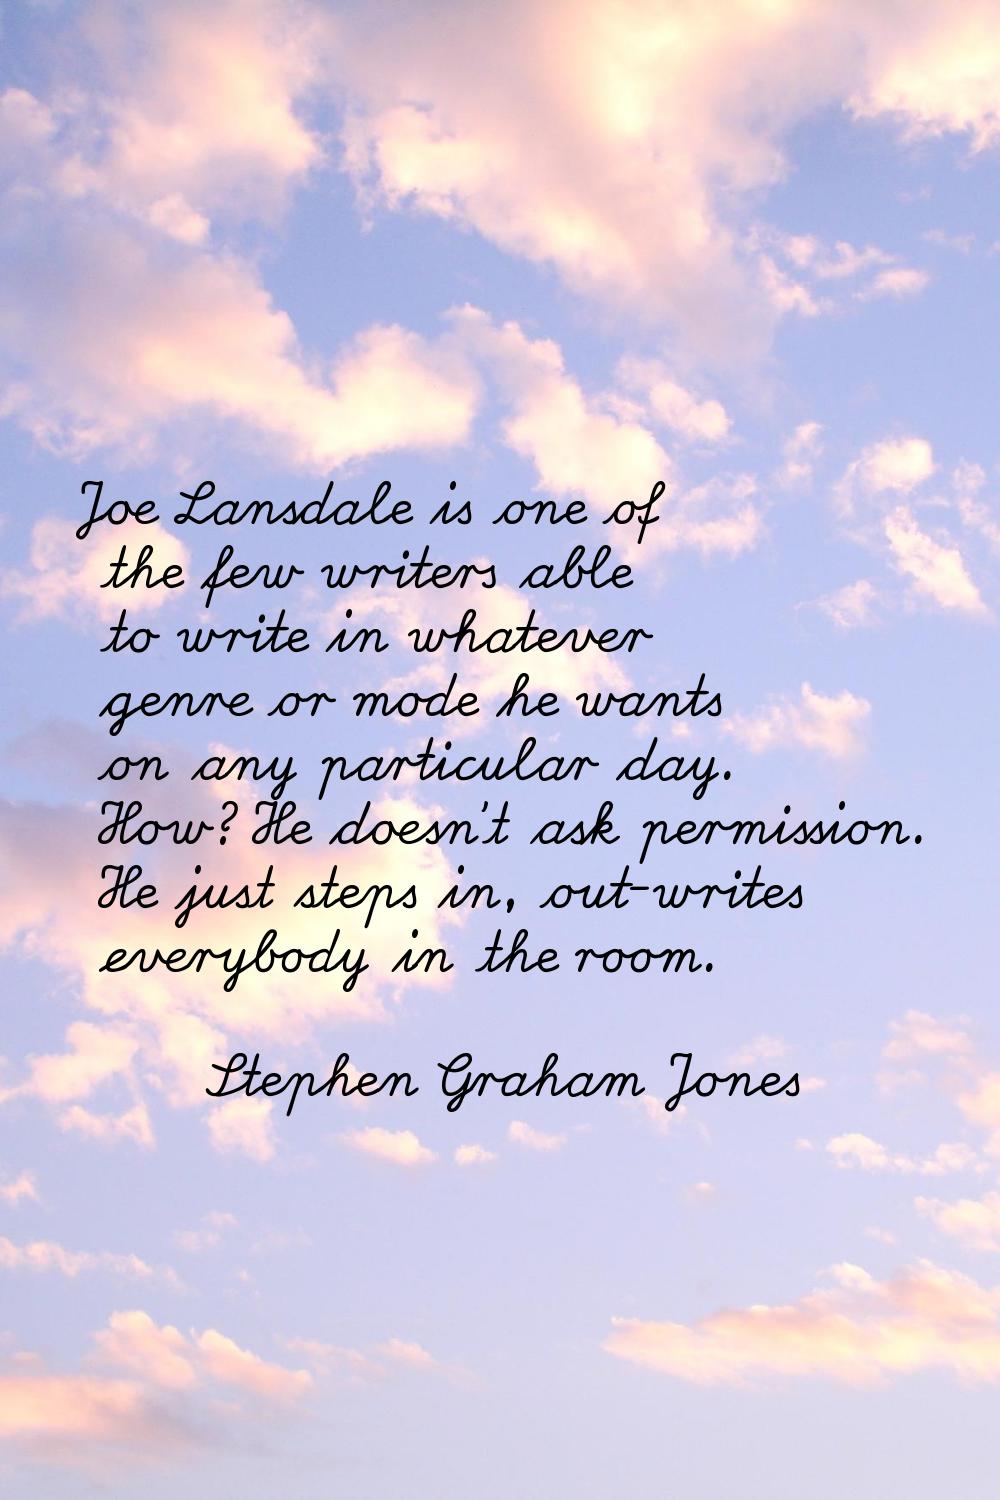 Joe Lansdale is one of the few writers able to write in whatever genre or mode he wants on any part